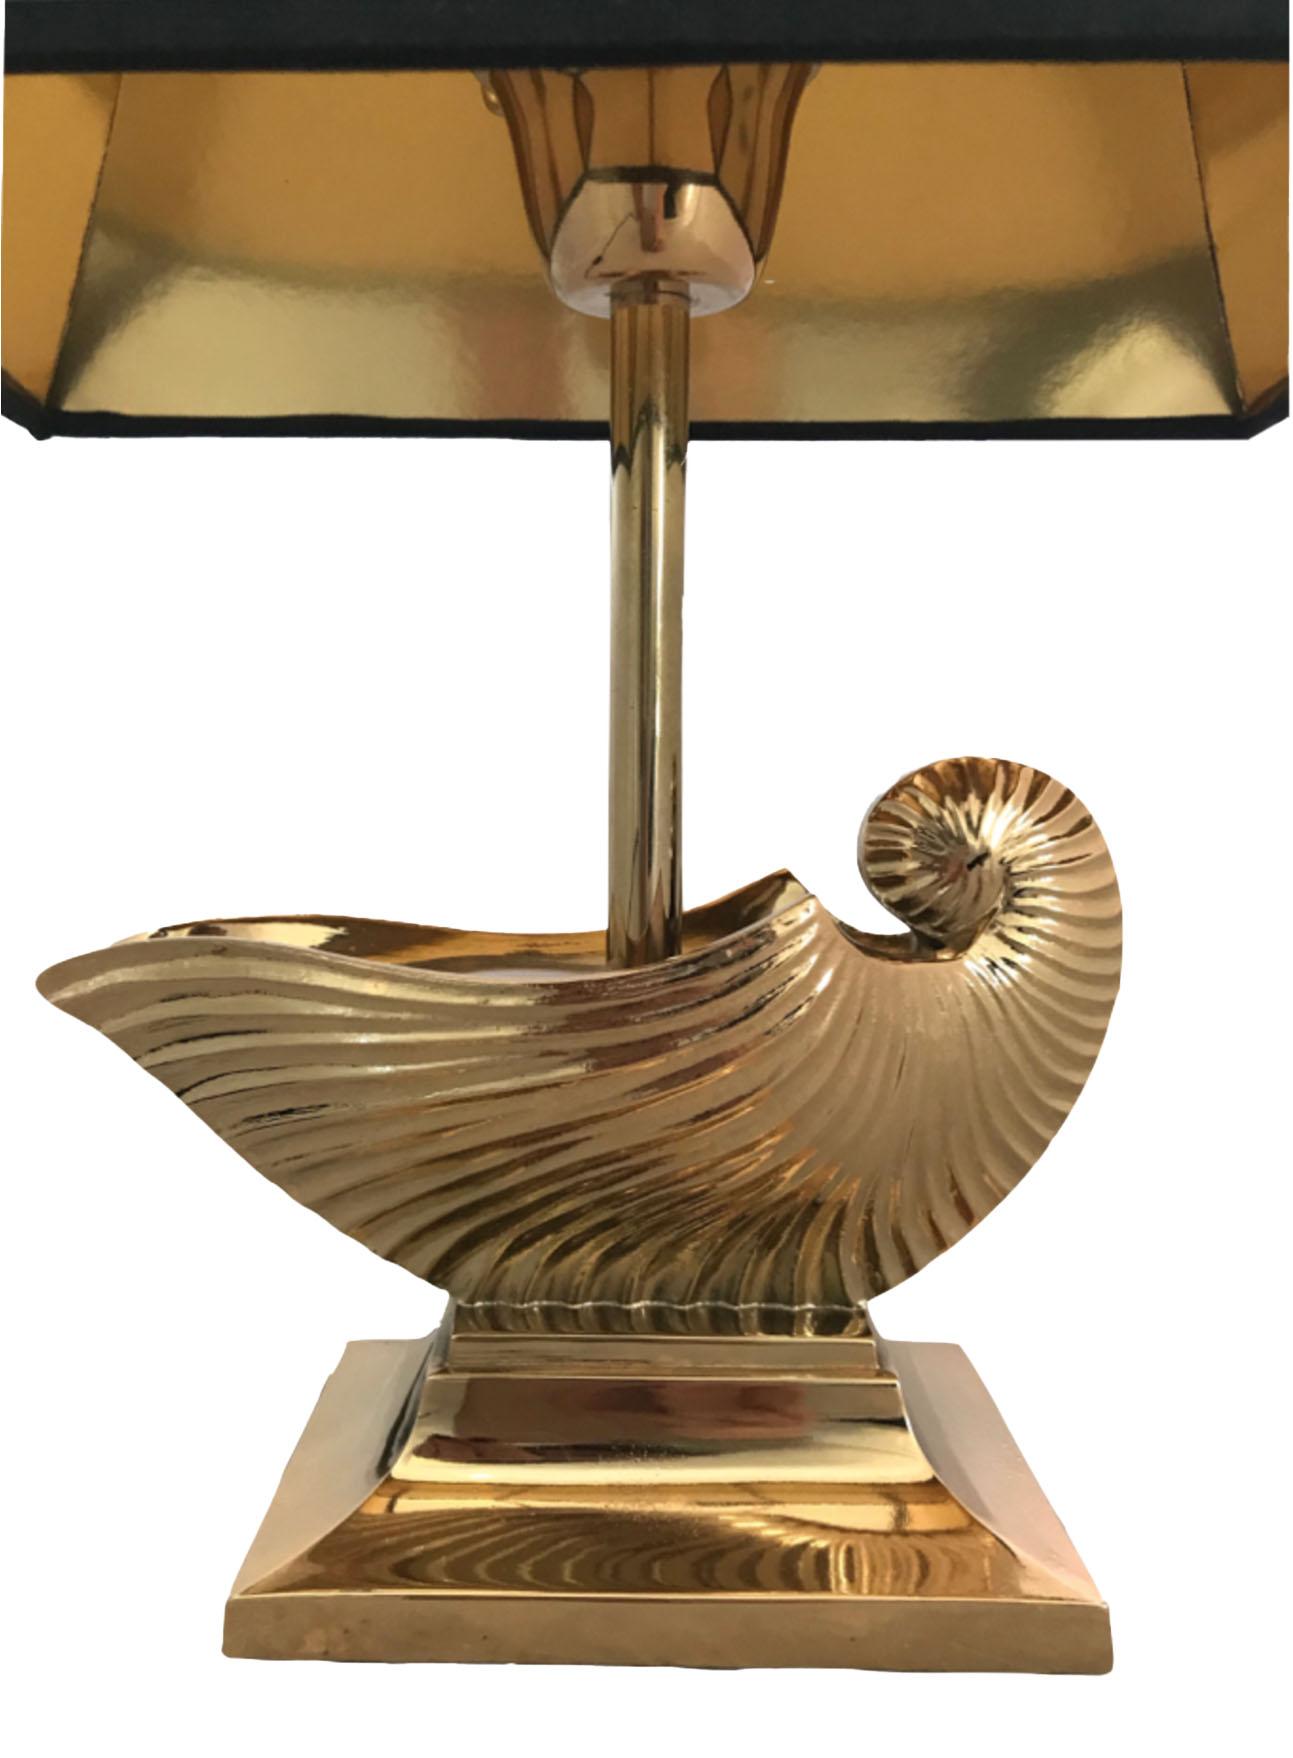 French brass metal nautilus shell table lamp Maison Charles

Black shade with gold interior is included.